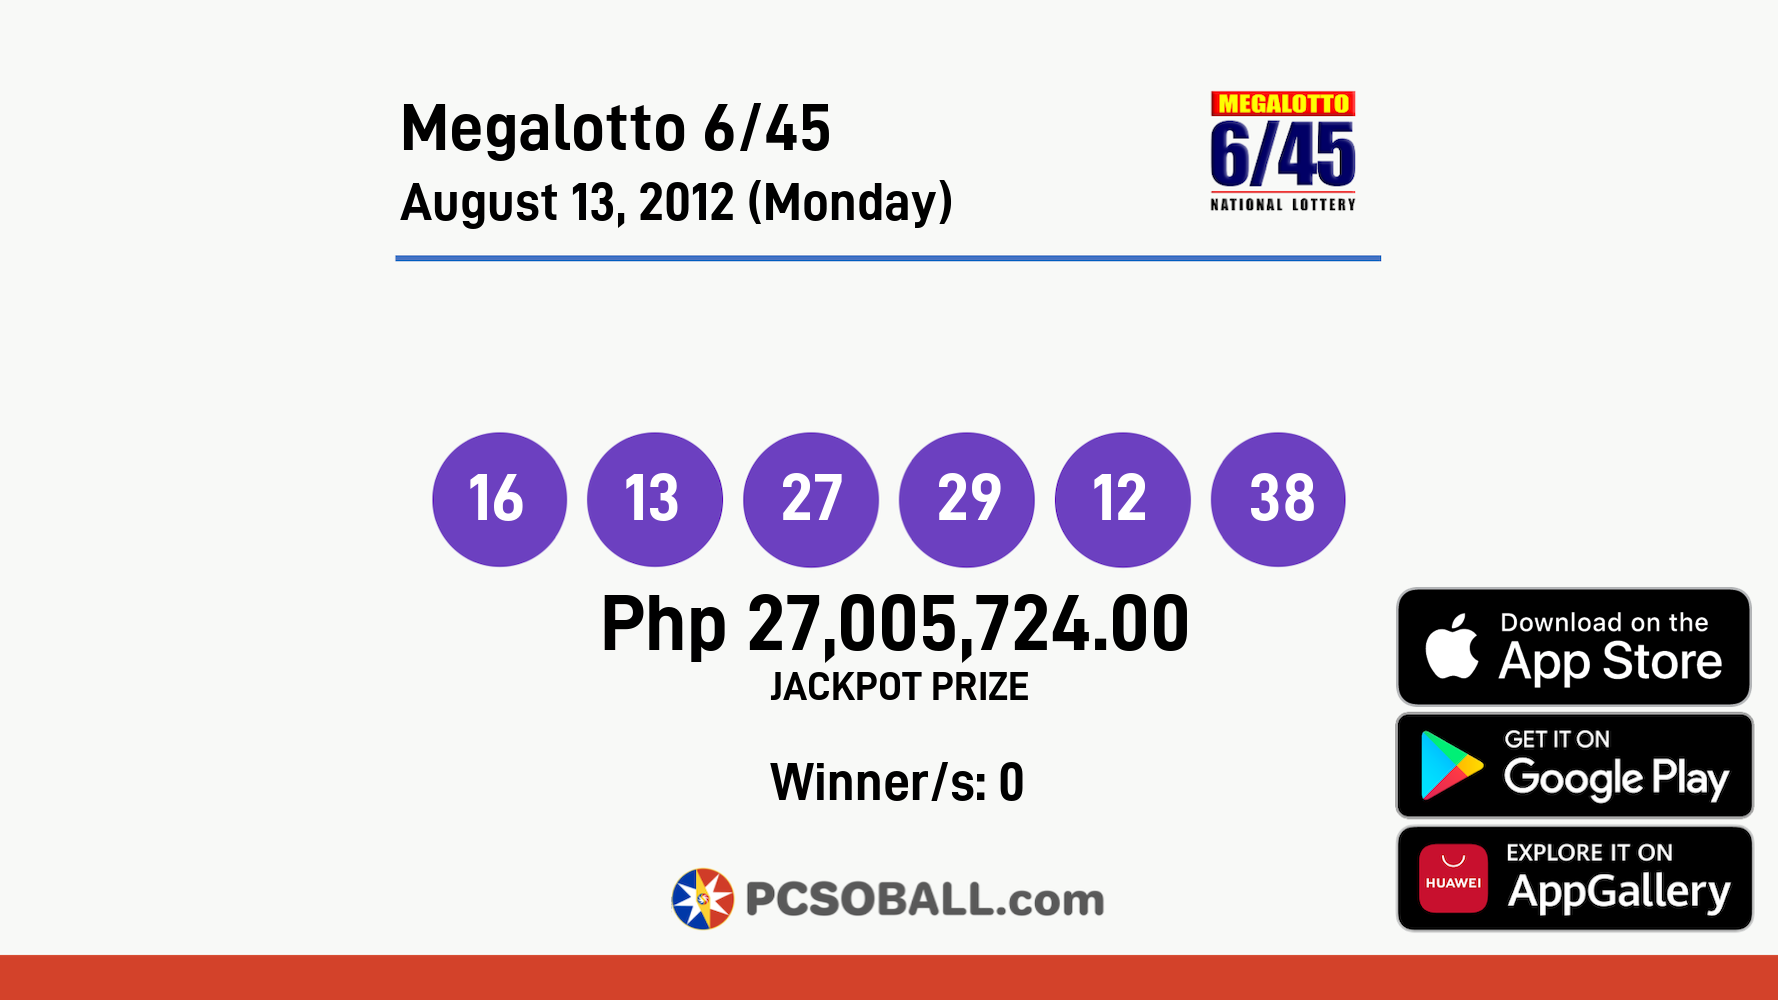 Megalotto 6/45 August 13, 2012 (Monday) Result